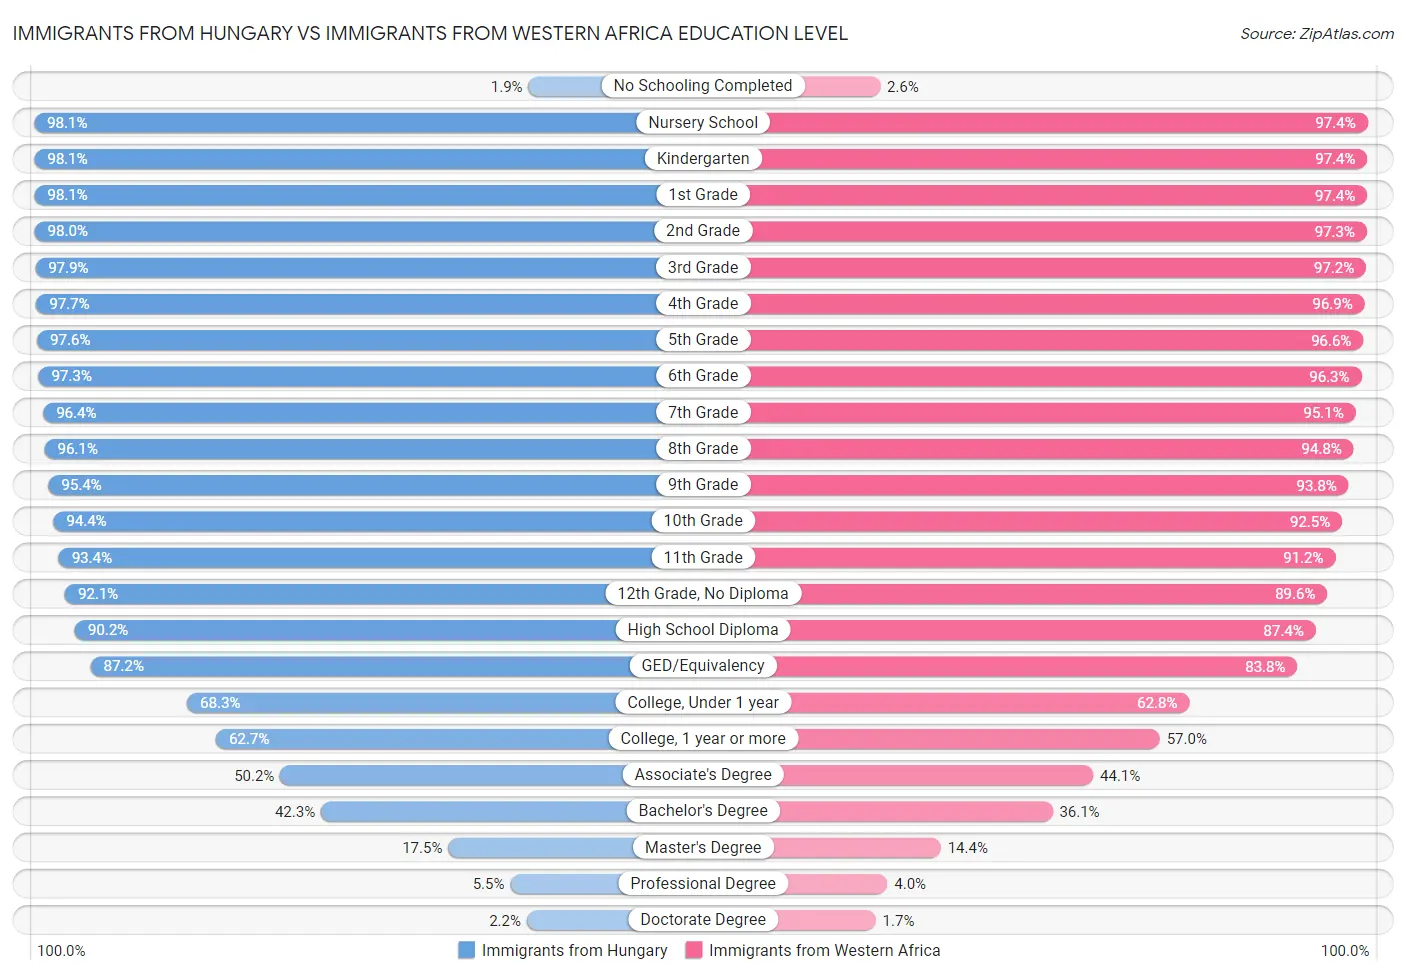 Immigrants from Hungary vs Immigrants from Western Africa Education Level